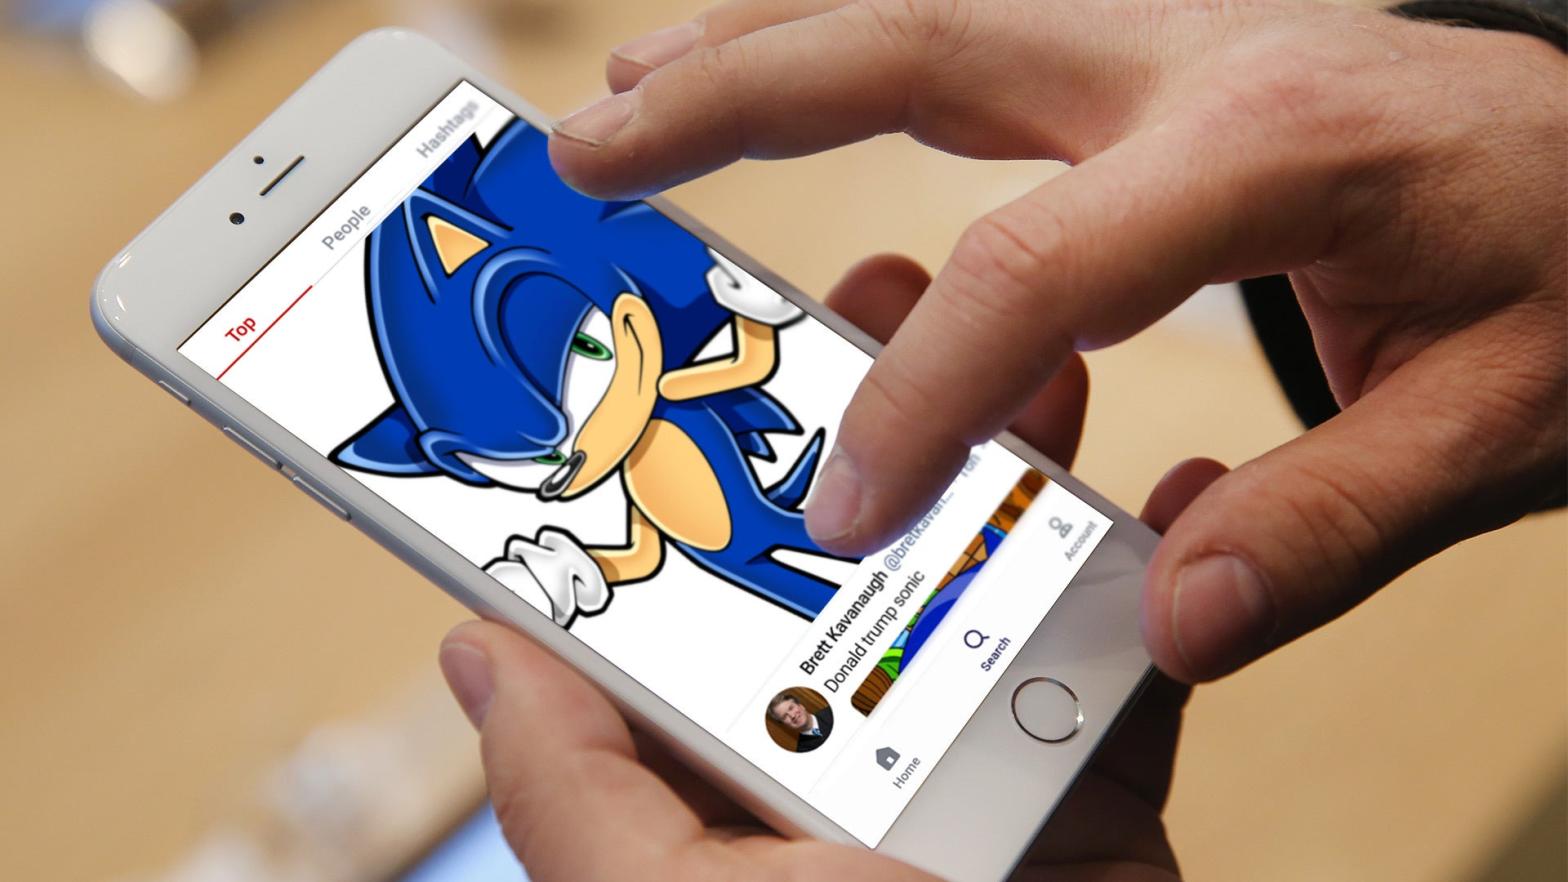 Sonic memes and a wide variety of other shitposts are flooding the just-launched conservative microblogging platform GETTR. (Image: GETTR / Sega / Kotaku / Sean Gallup, Getty Images)